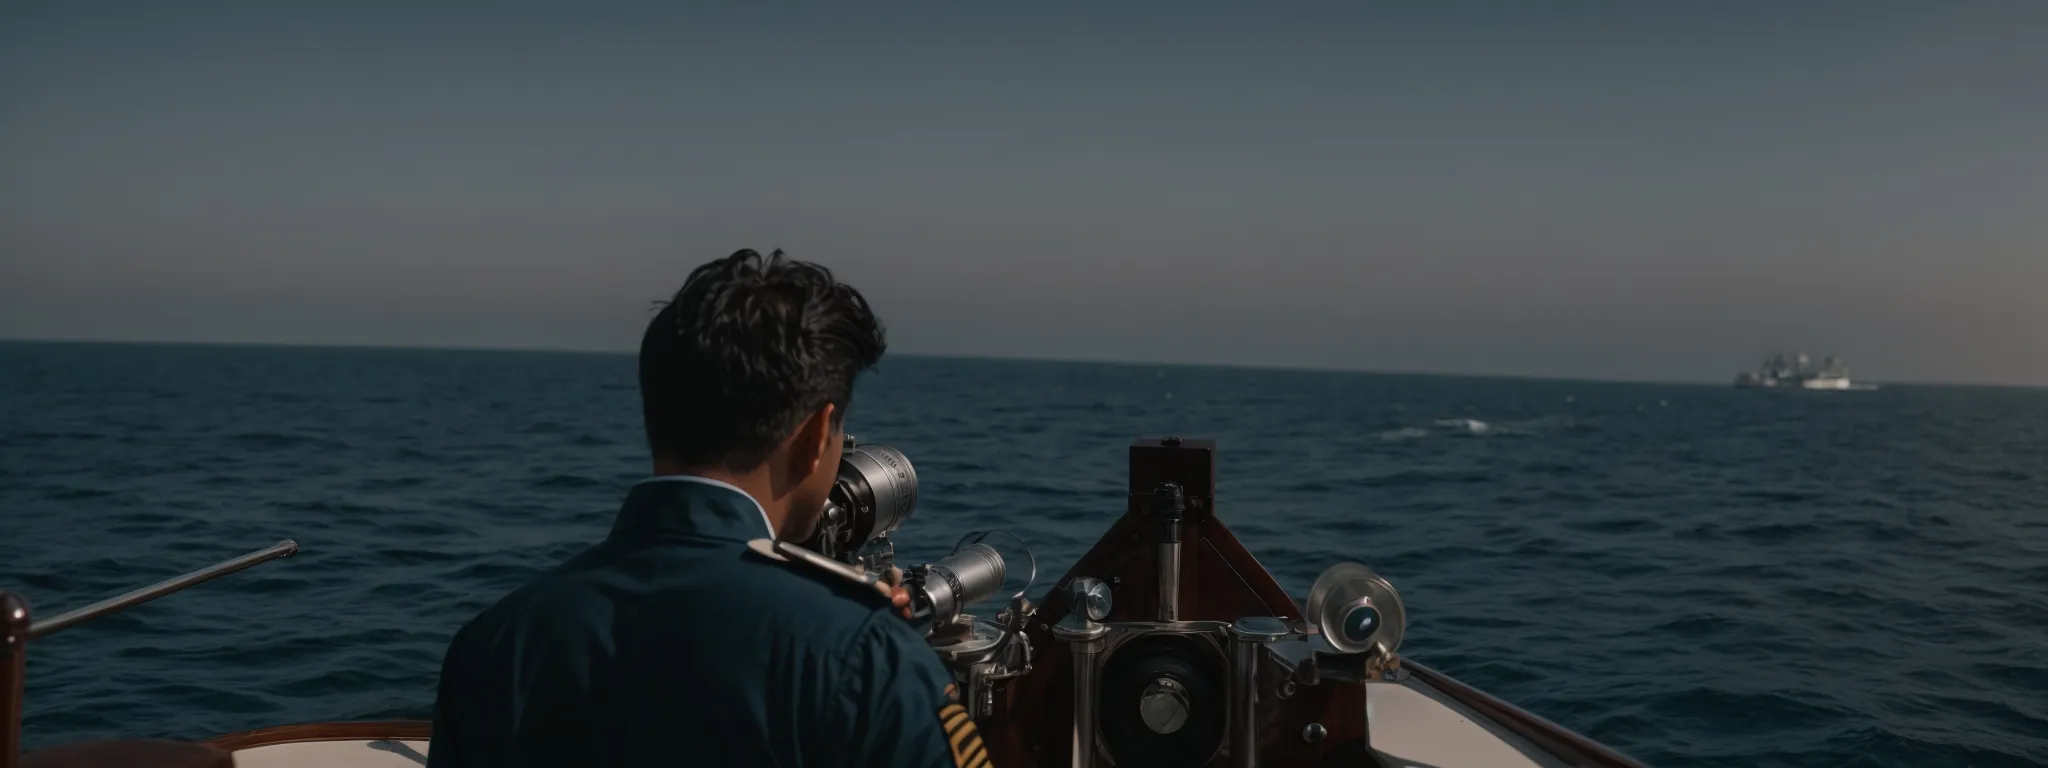 a captain at a ship's helm peers through a spyglass over vast ocean waters under a clear sky.